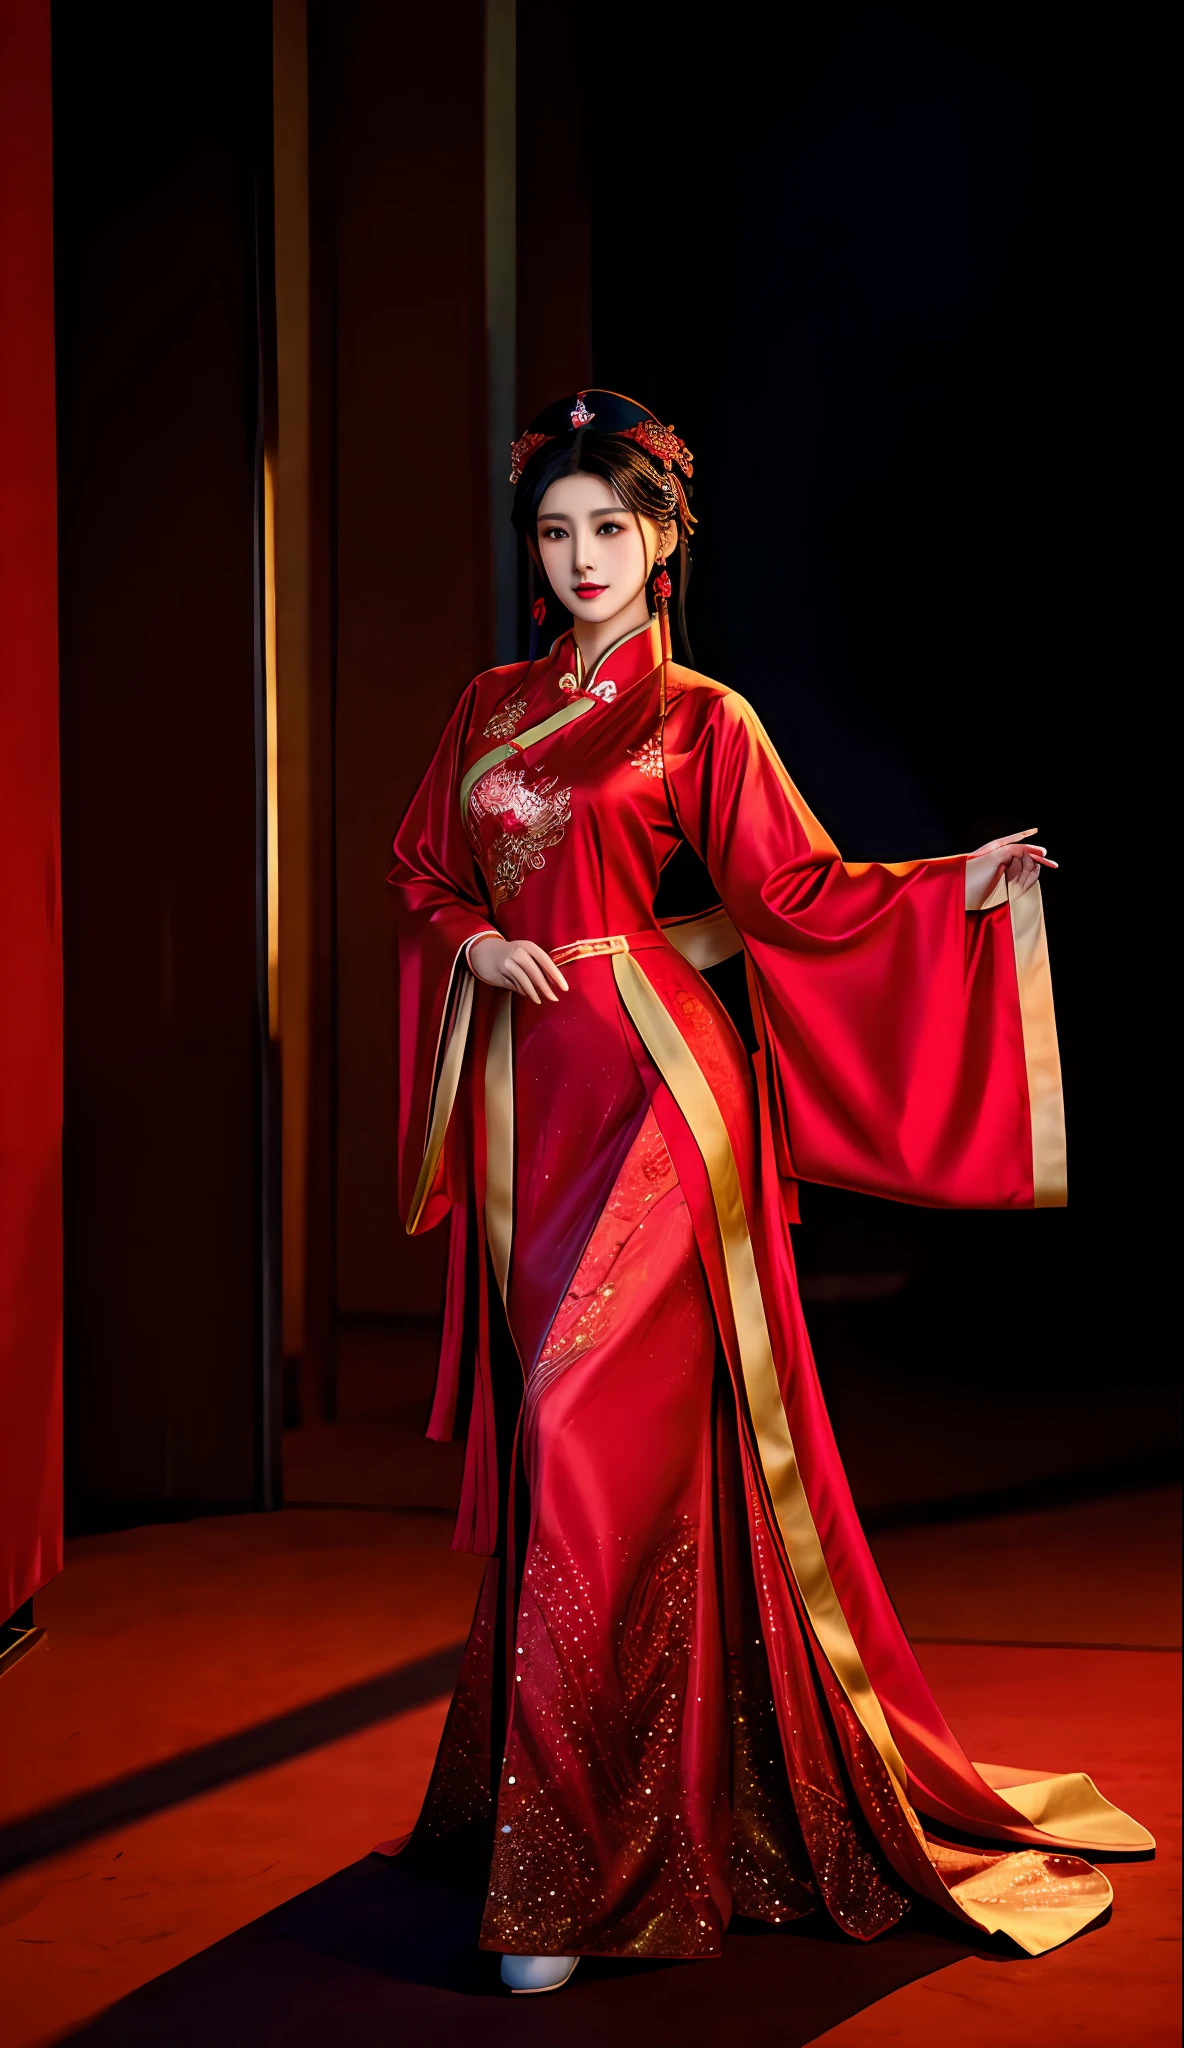 A woman in a red dress stands on stage，arms out, full-body xianxia, Wearing a red cheongsam, Cheongsam, Fan Bingbing, shaxi, elegant red color dress, Chinese dress, xision wu, wearing red formal attire, chinese empress, author：Teacher Elena, inspired by Xie Sun, ruan jia beautiful!